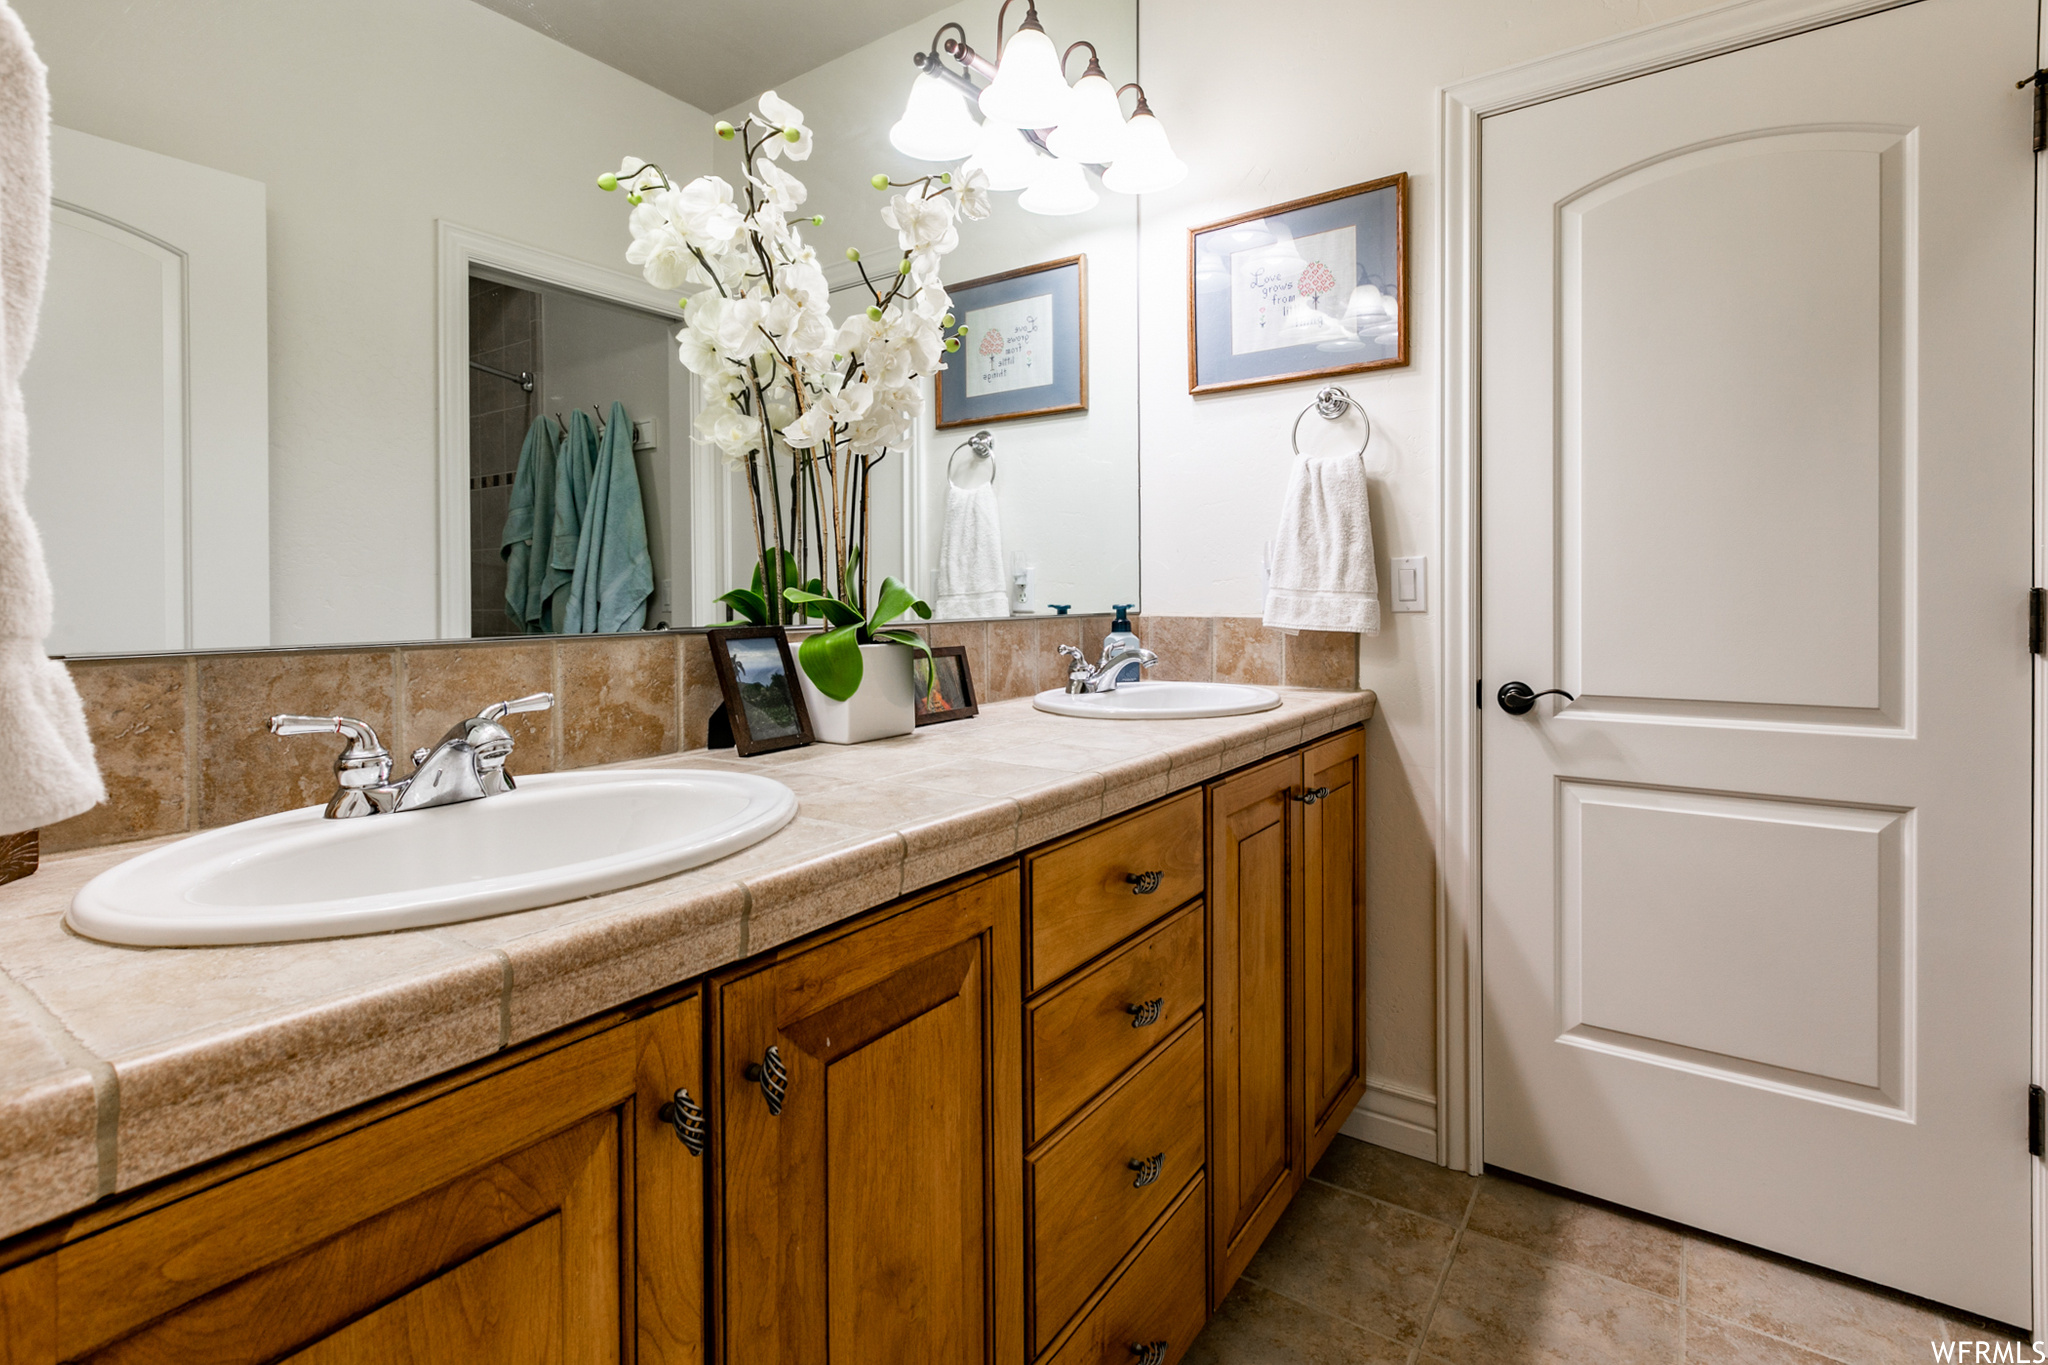 A Jack & Jill bath sits between the two upstairs bedrooms and includes a double vanity.